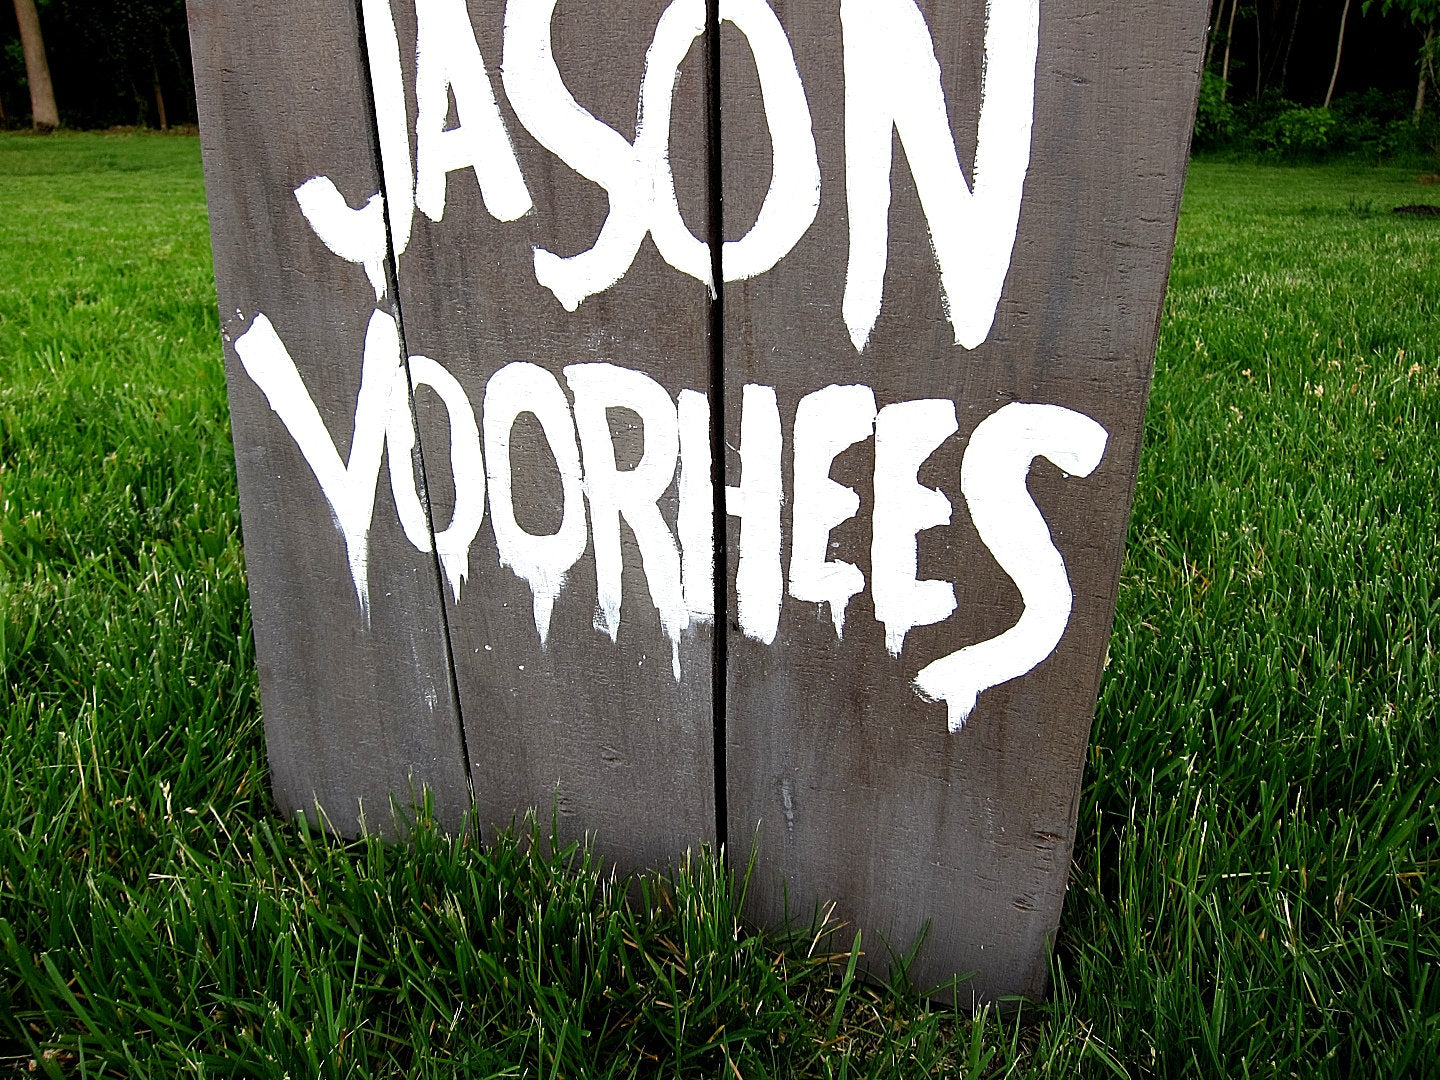 Jason Voorhees Part 5 Friday the 13th Tombstone